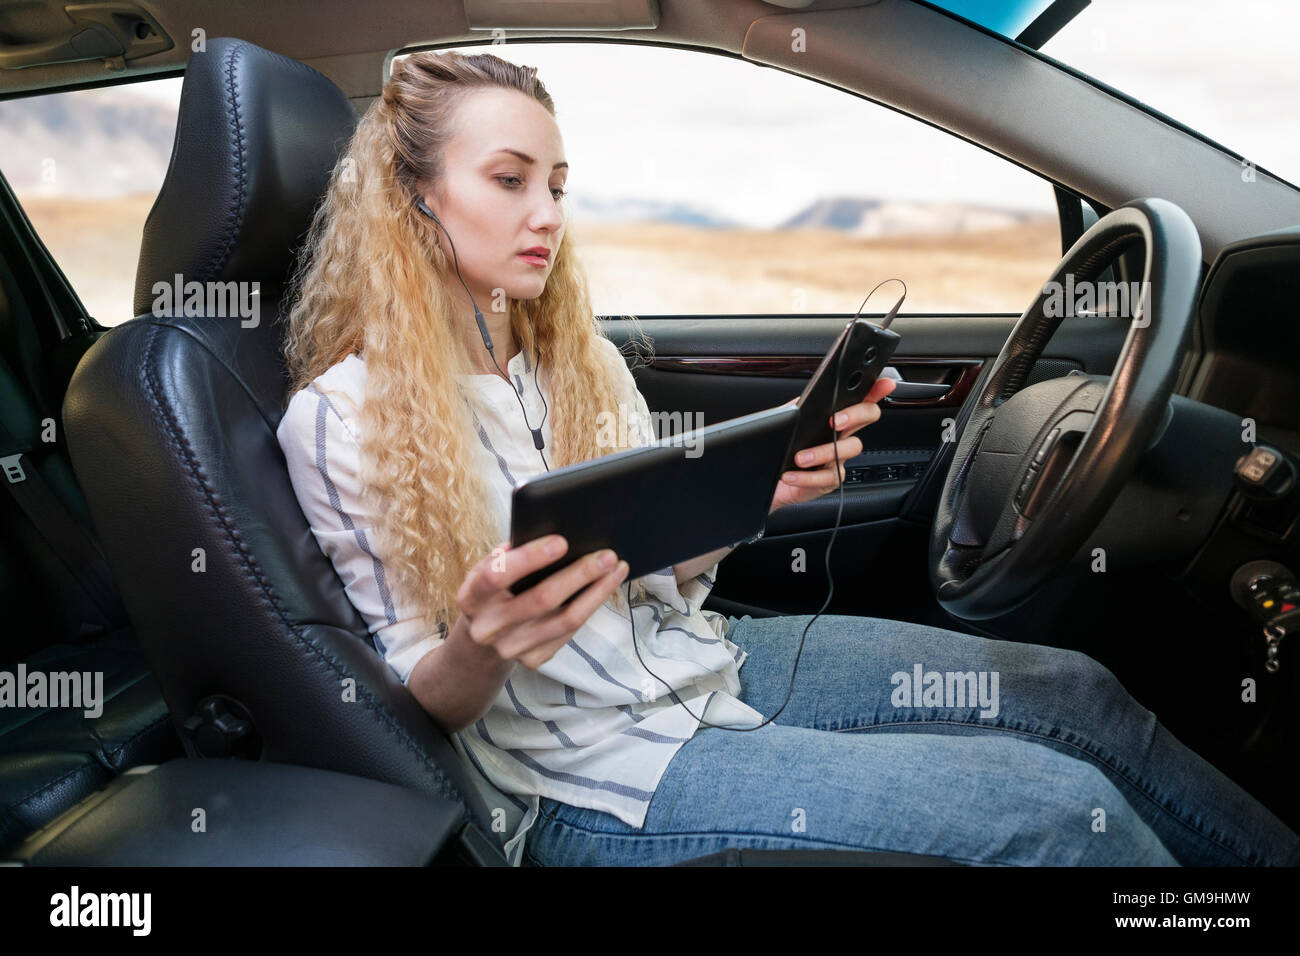 Woman sitting in car and using tablet and mobile phone at same time Stock Photo